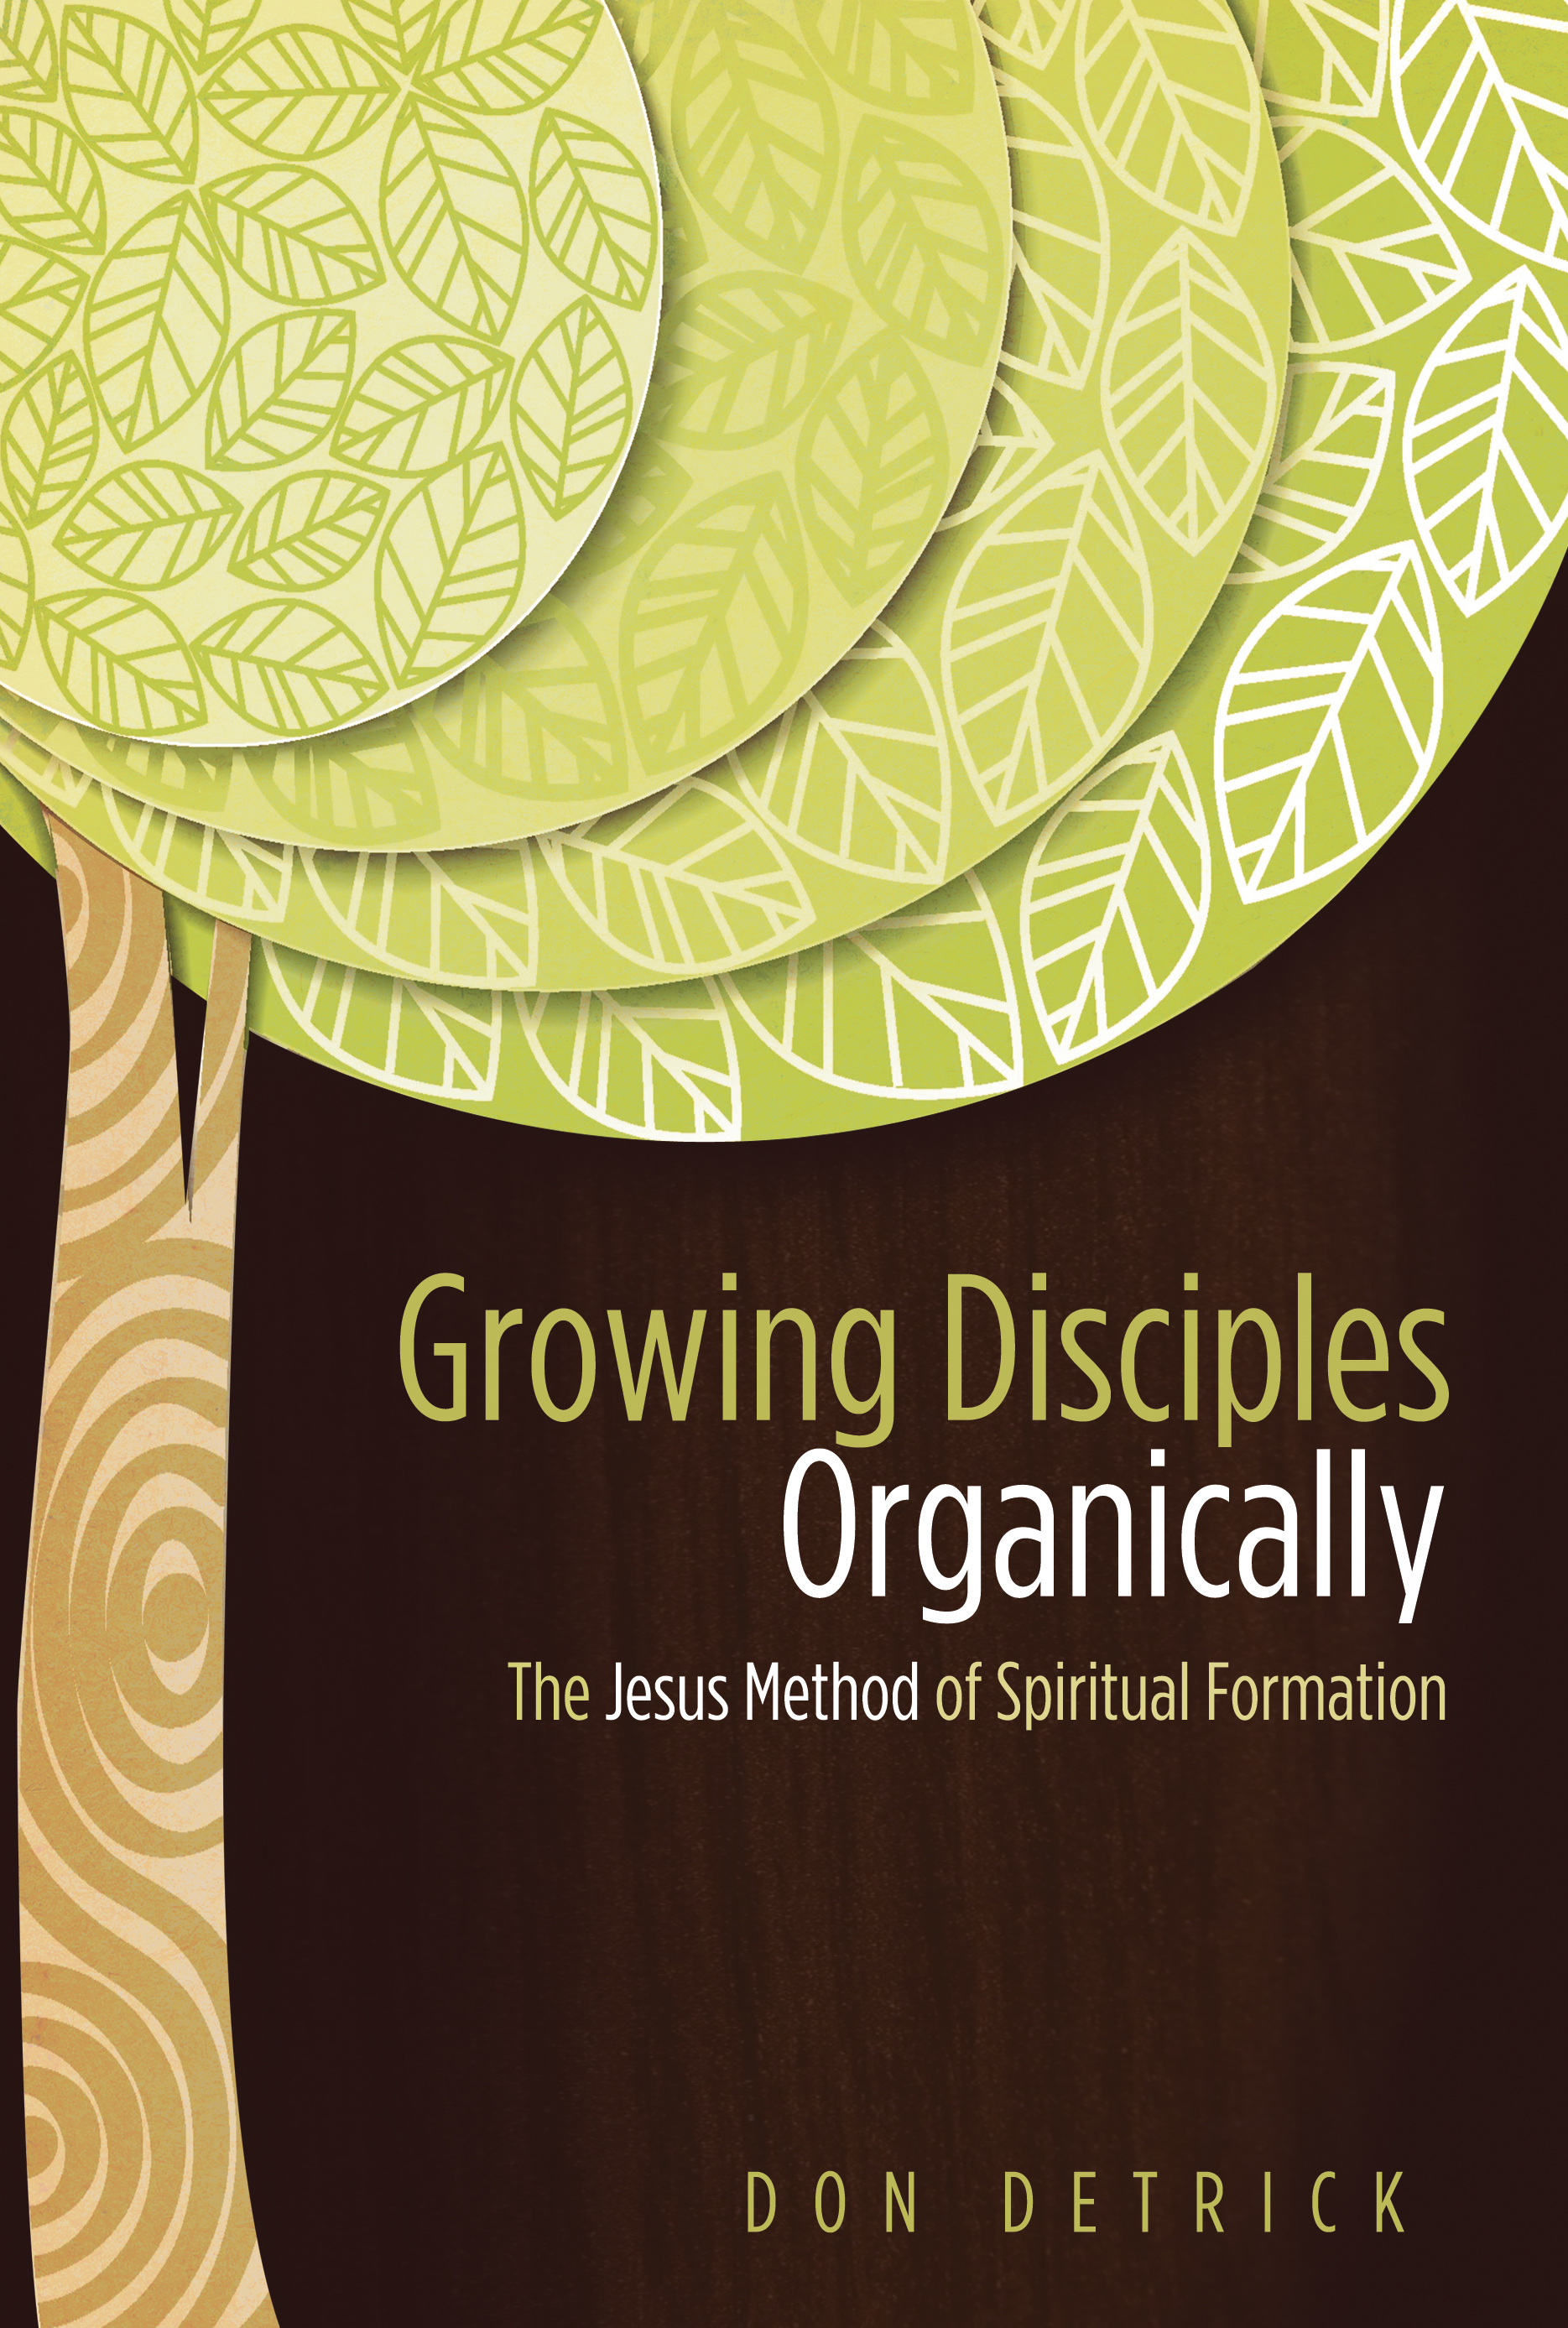 Growing Disciples Organically